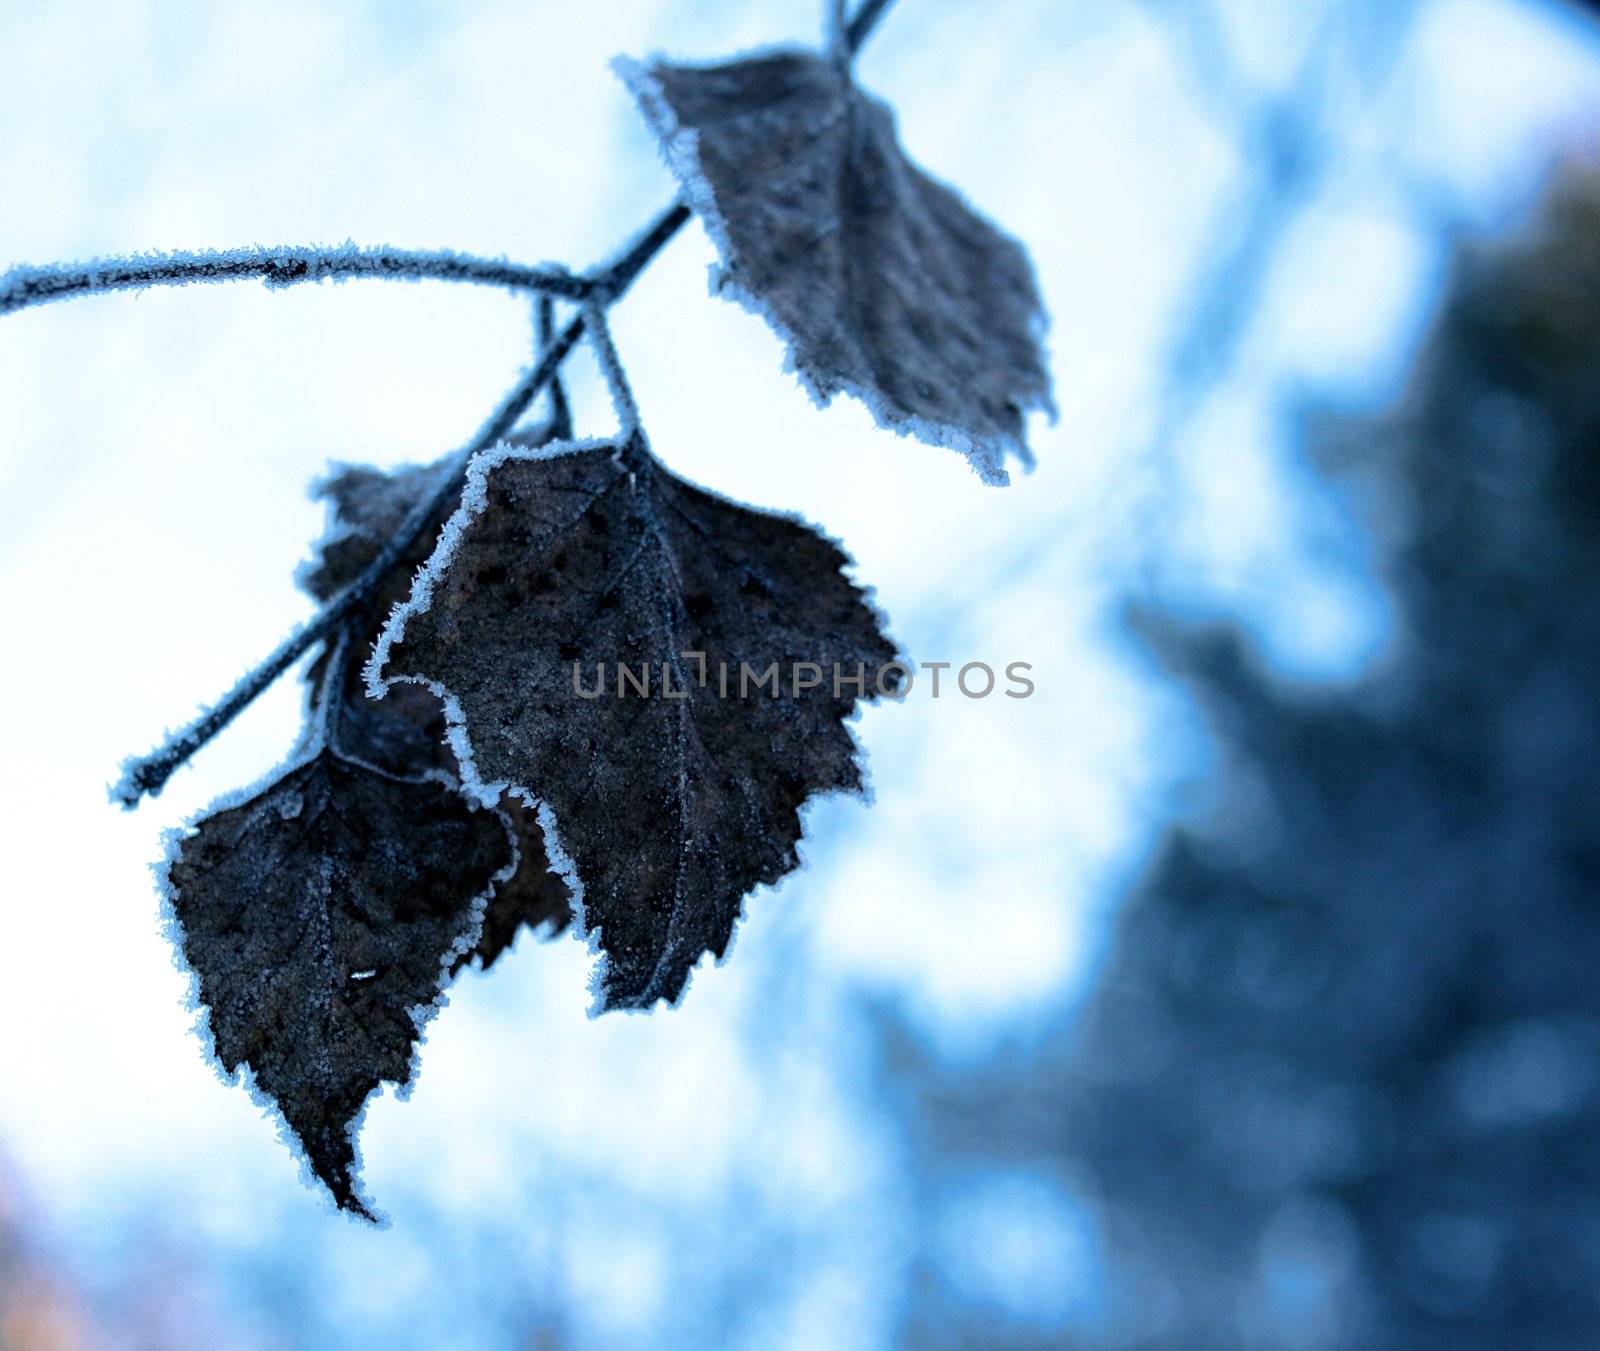 Winter leaf surrounded by a border of ice crystals